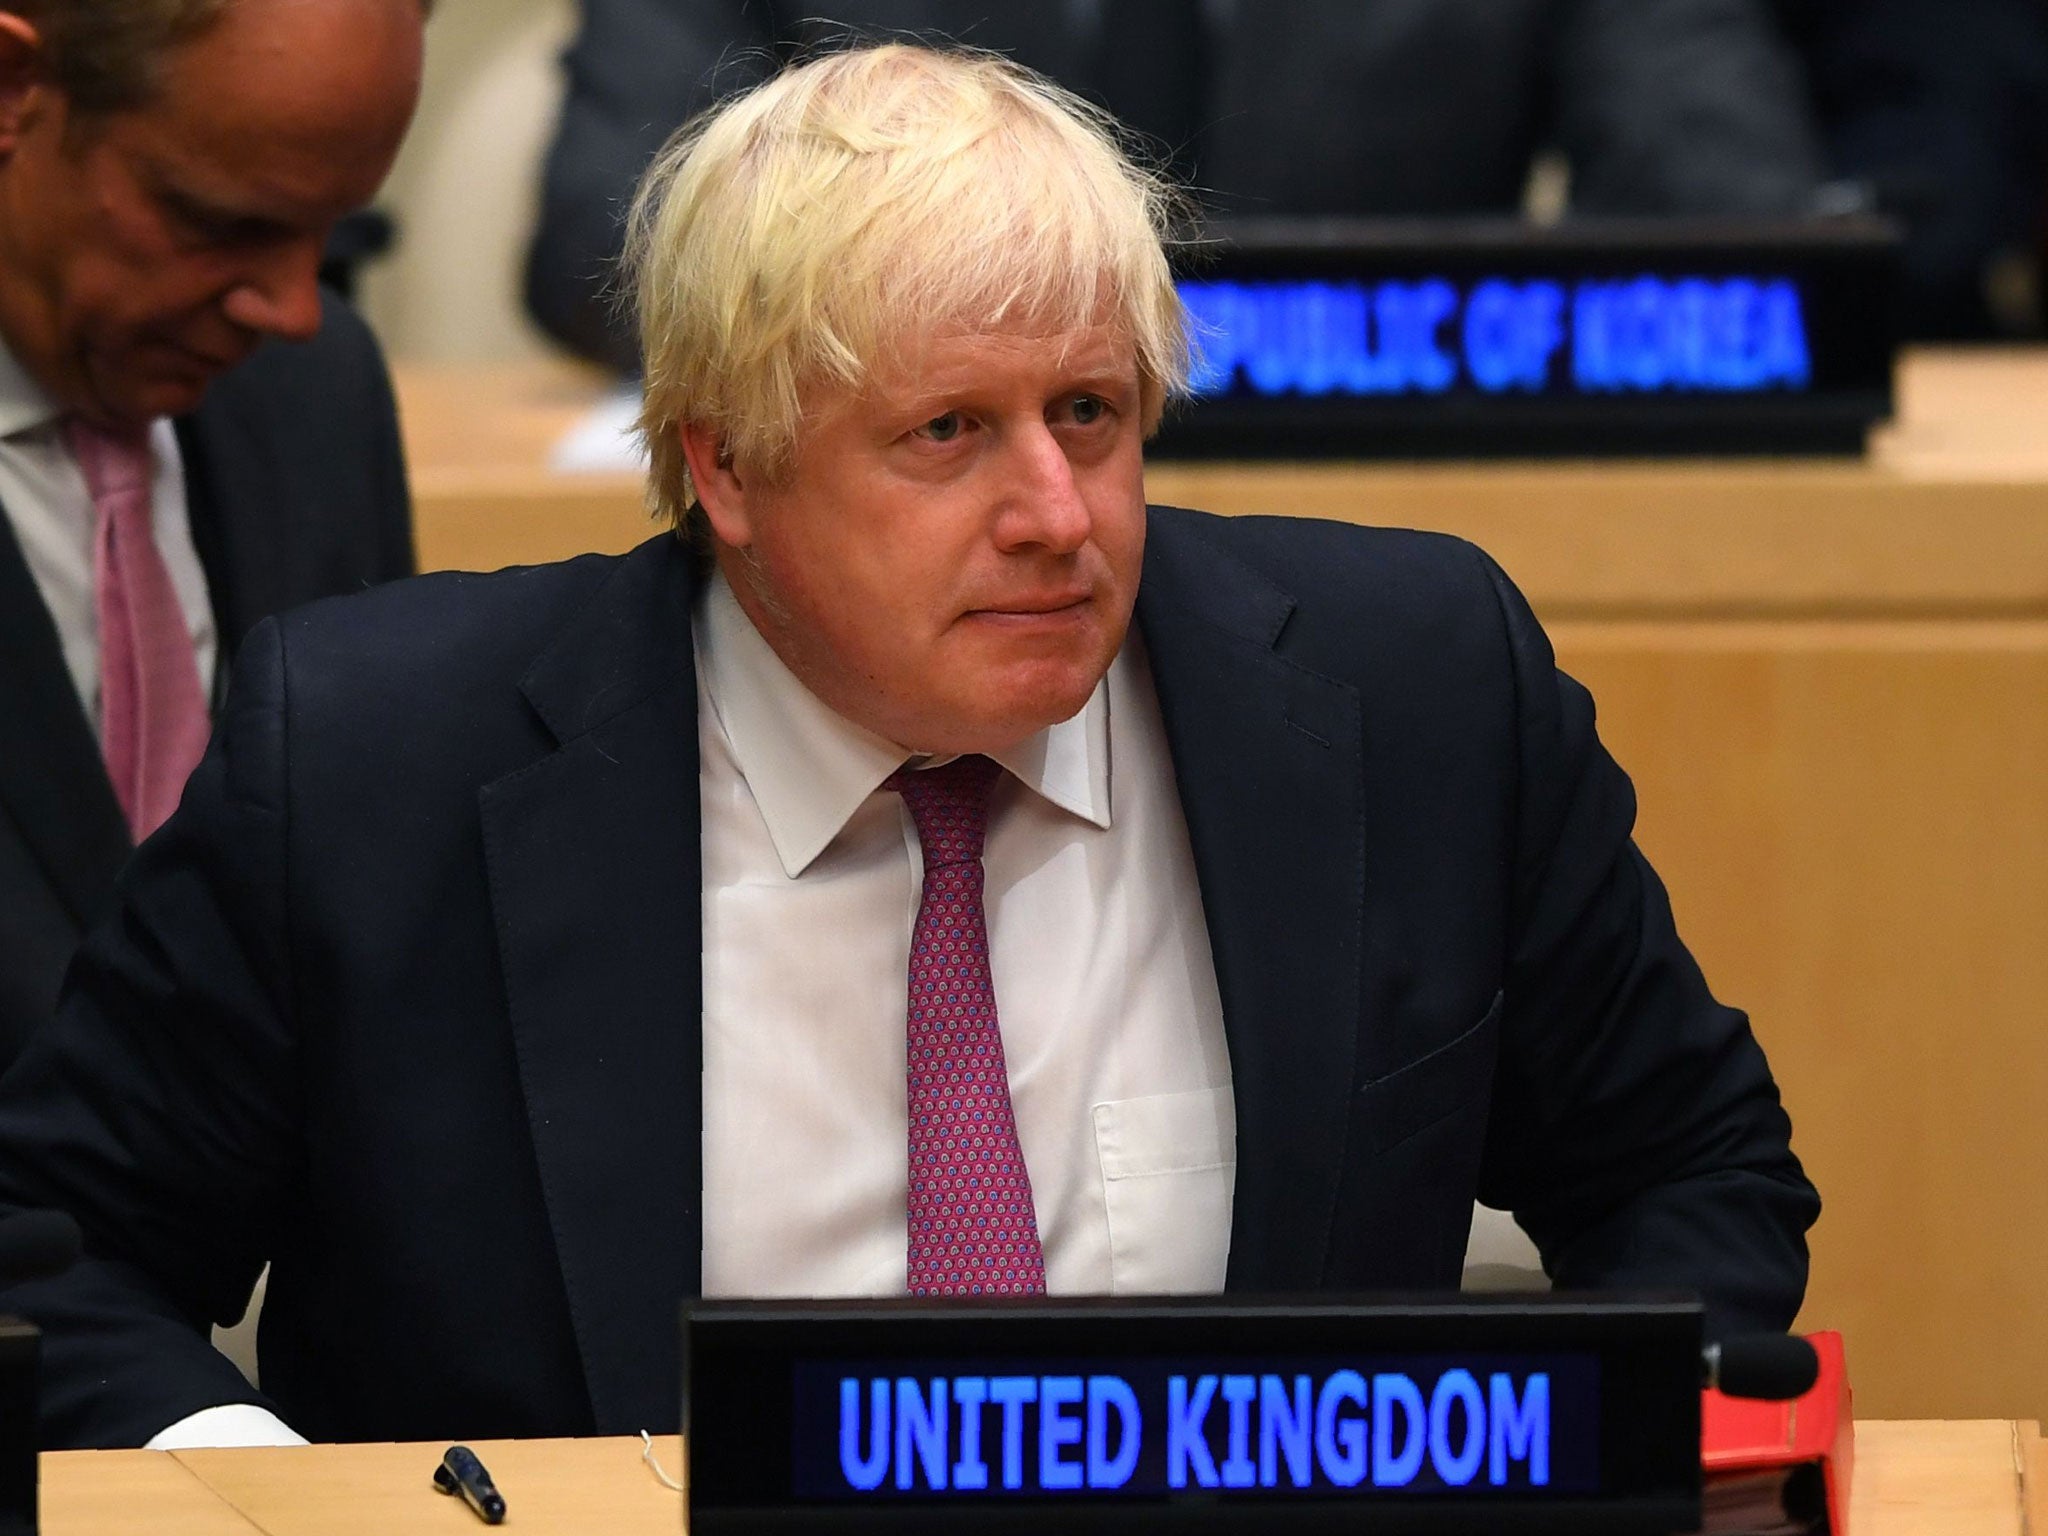 Boris Johnson and Theresa May attended separate meetings at the UN headquarters in New York on Tuesday